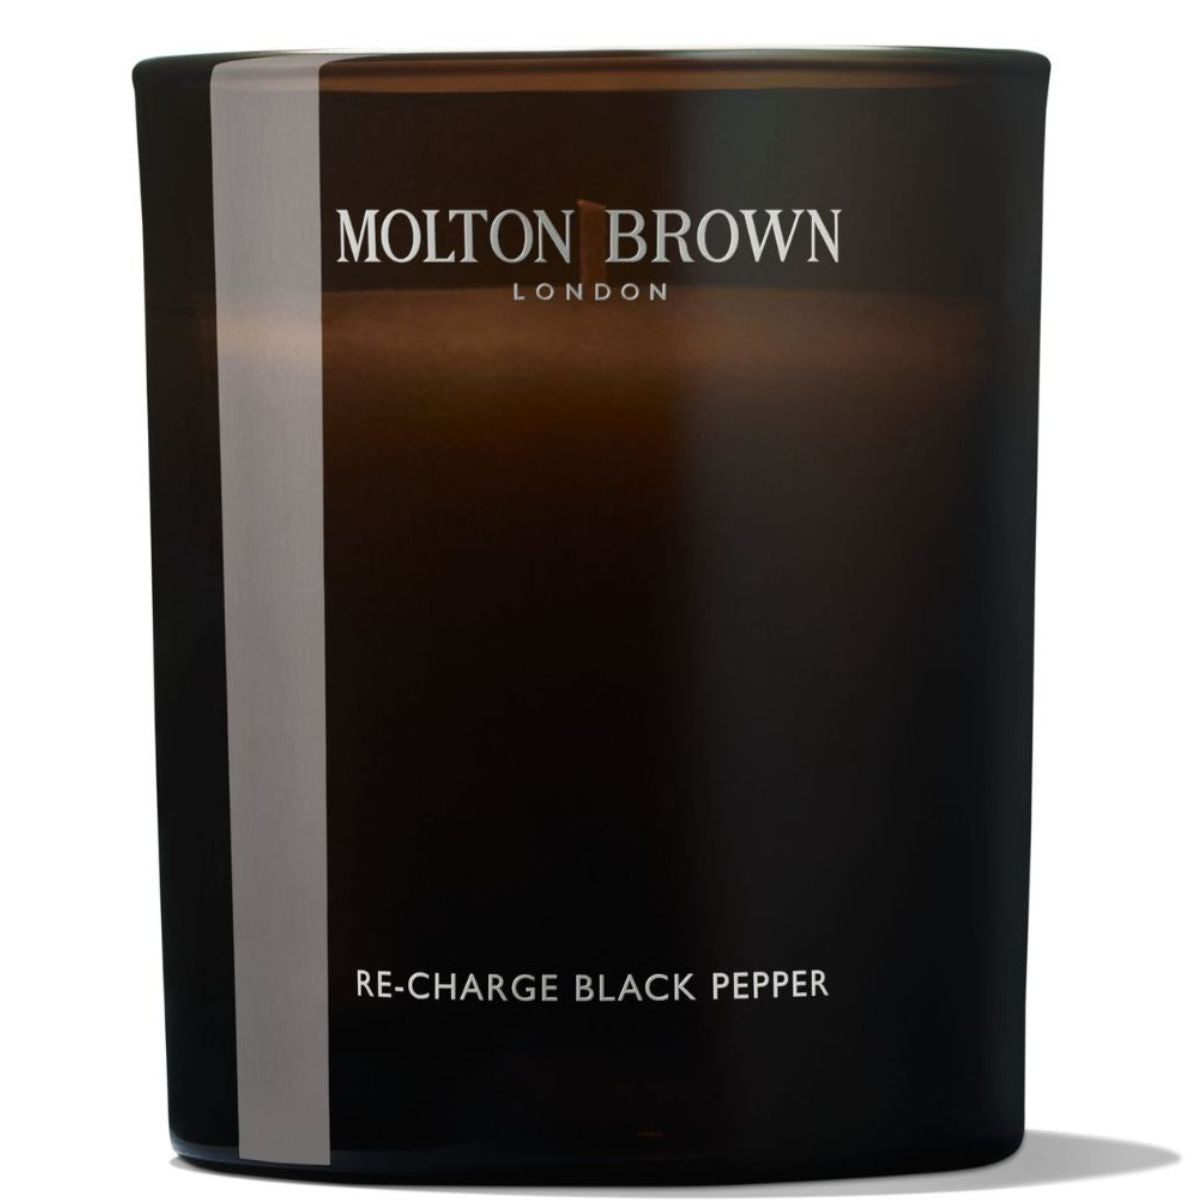 Molton Brown Re-Charge Black Pepper Signature Scented Single Wick Candle.